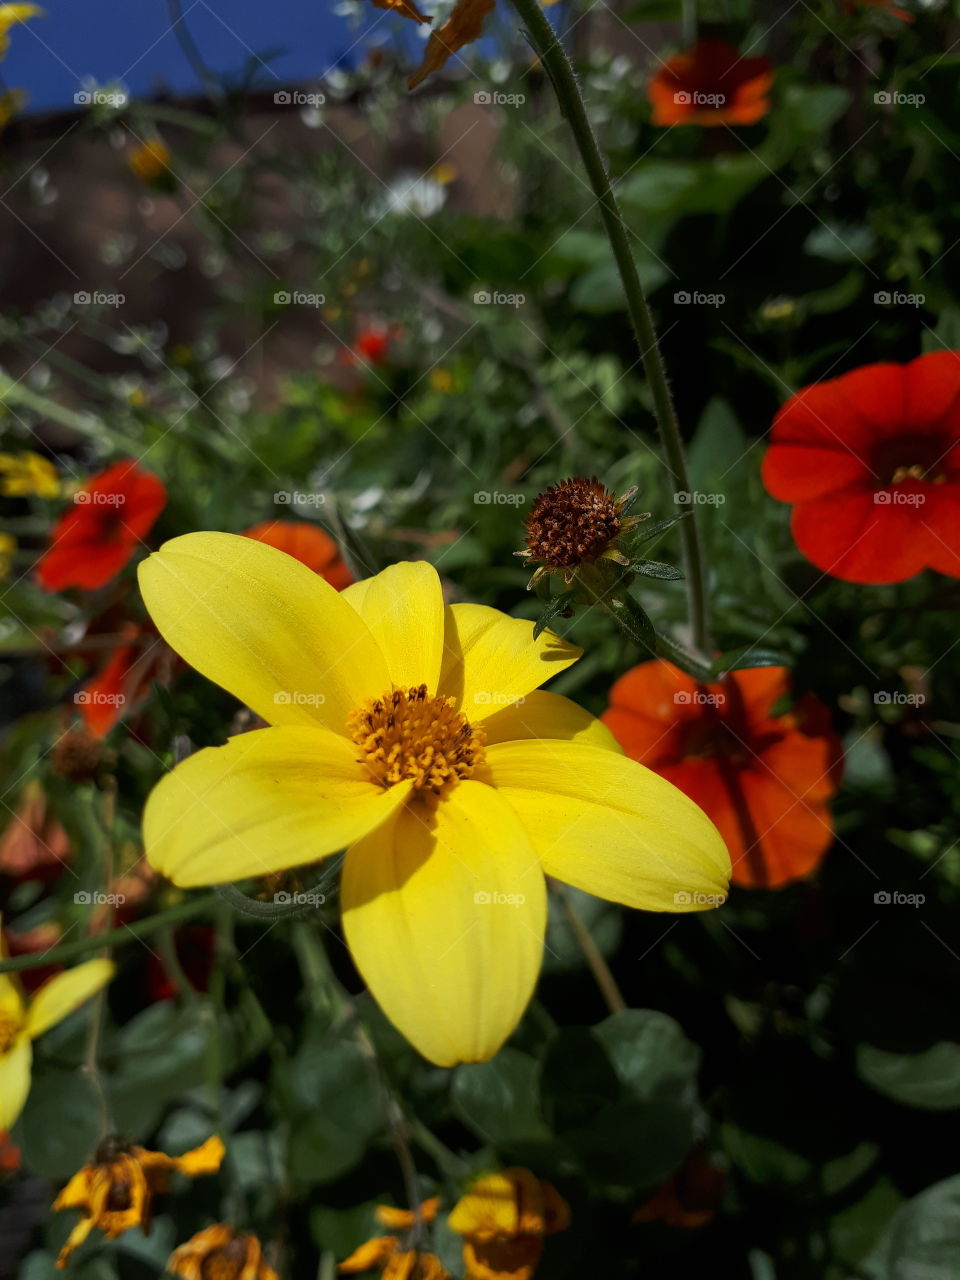 Yellow flower against red flowers and green foliage